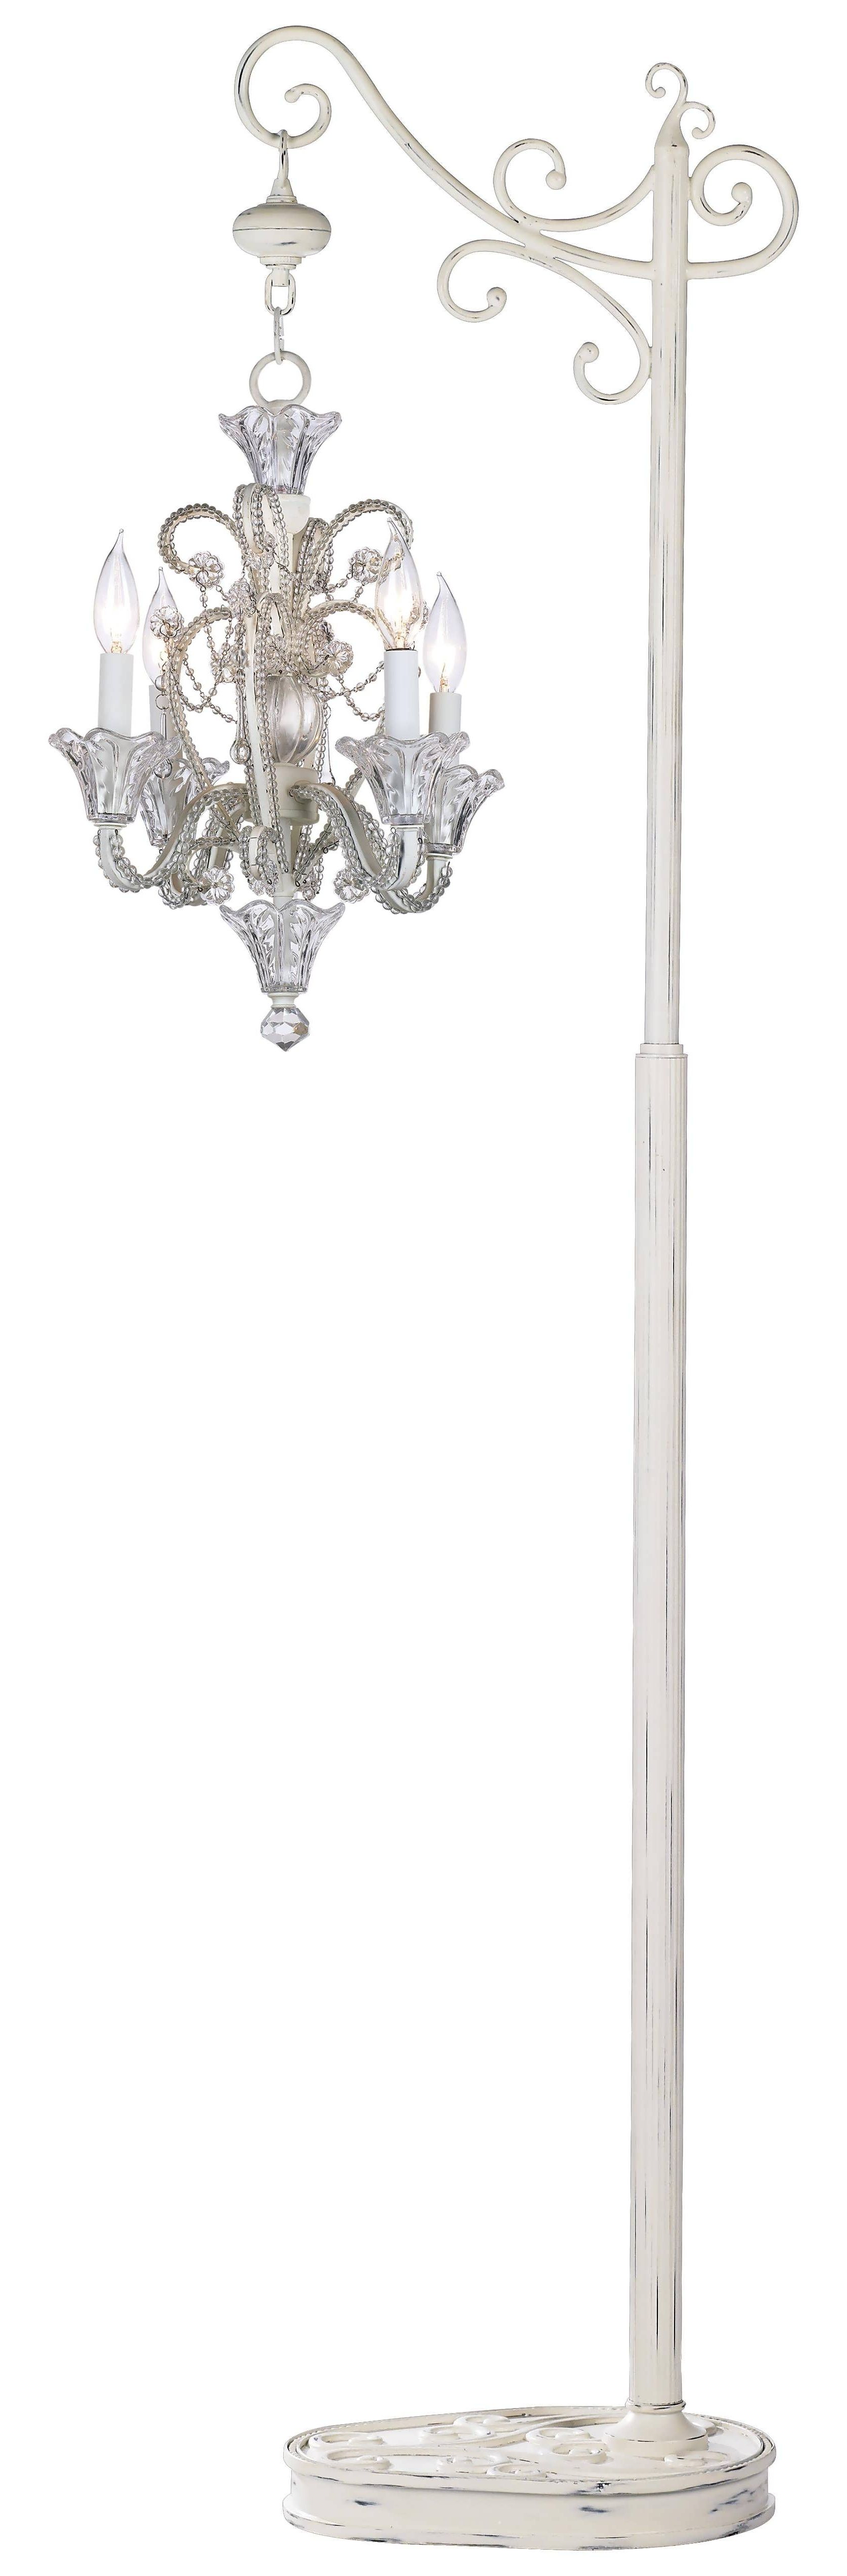 Famous Tall Standing Chandelier Lamps In Chandelier : Tall Lamps Floor Standing Lamps Standing Chandelier (View 4 of 20)